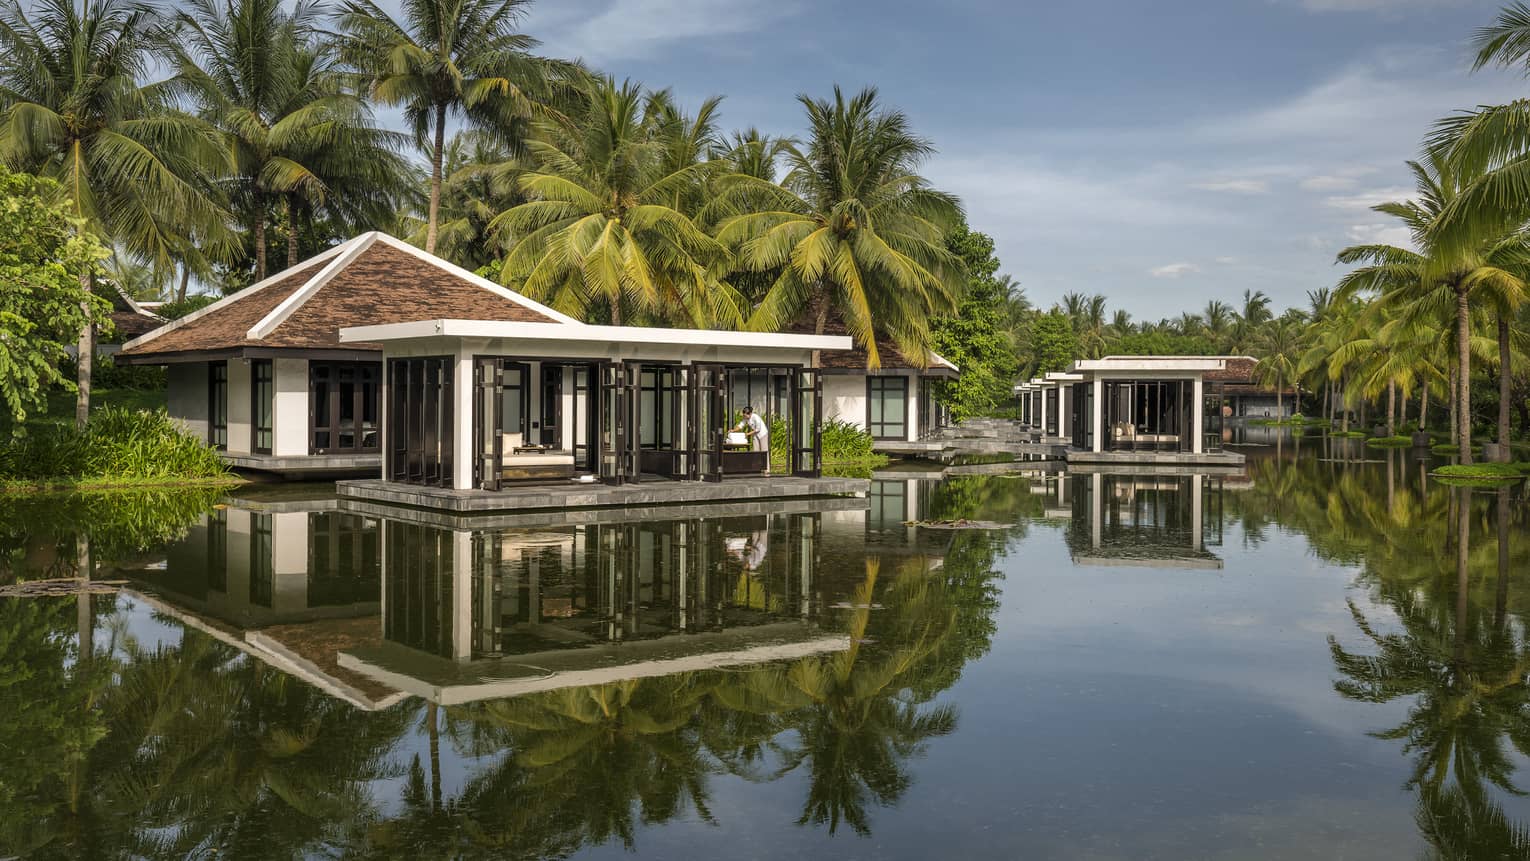 Overwater Heart of Earth spa villa staff folds white towels on deck, reflection in water